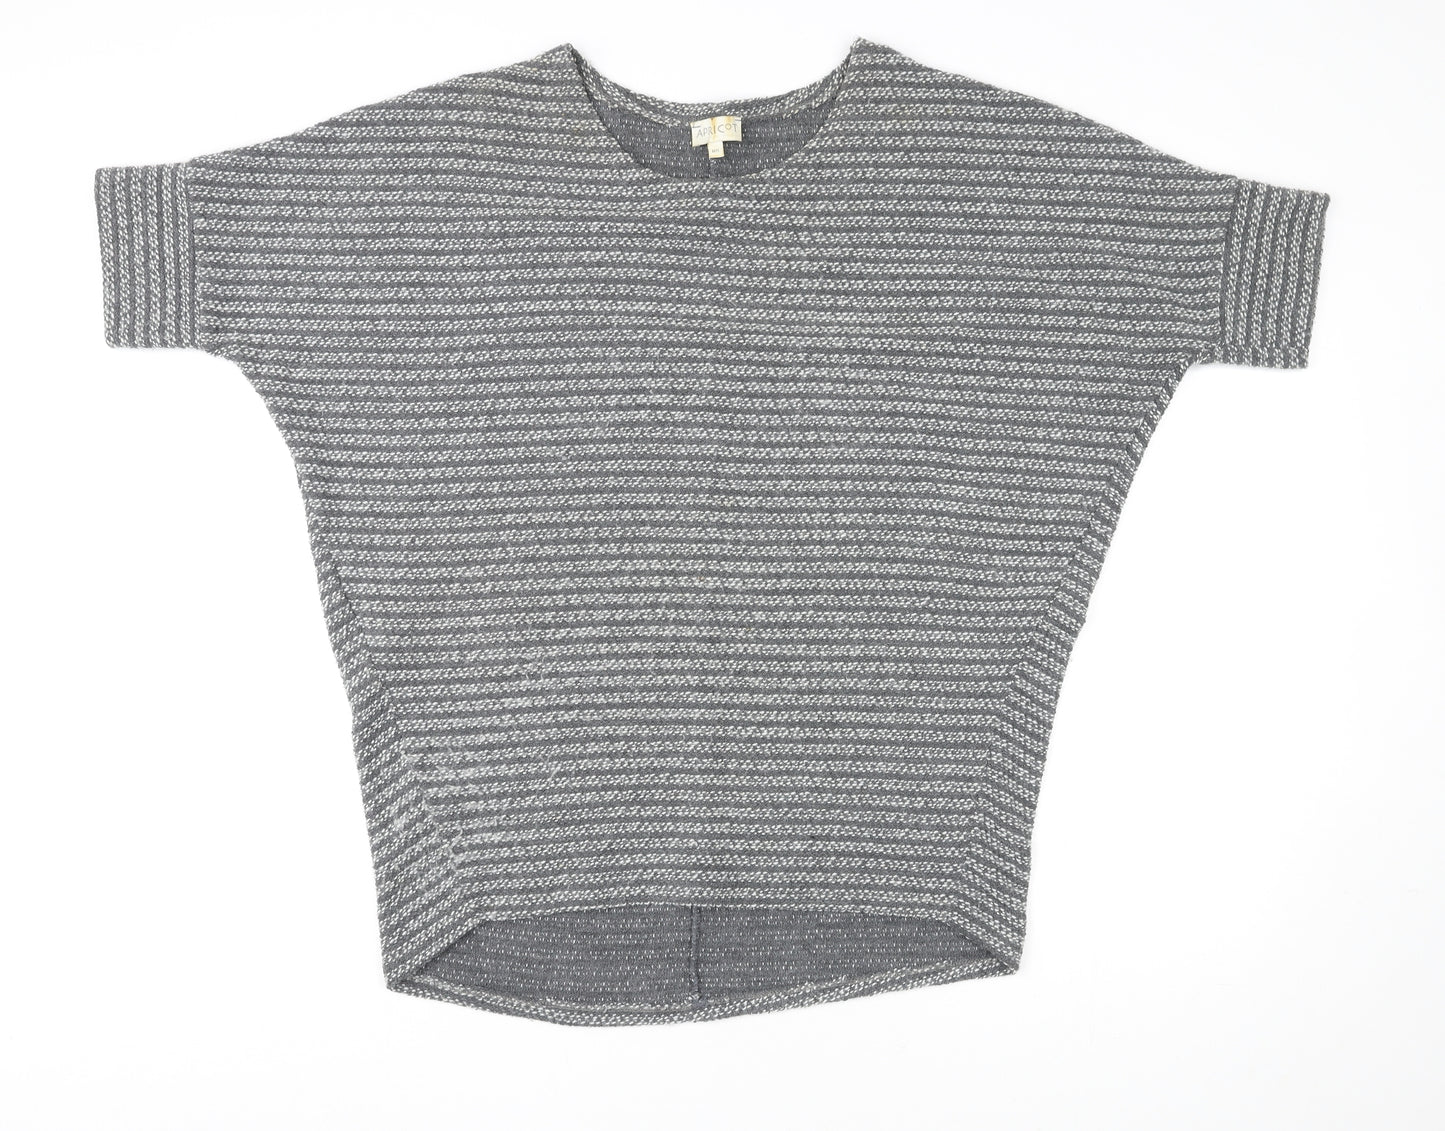 Apricot Womens Grey Round Neck Striped Acrylic Pullover Jumper Size M - Size M-L